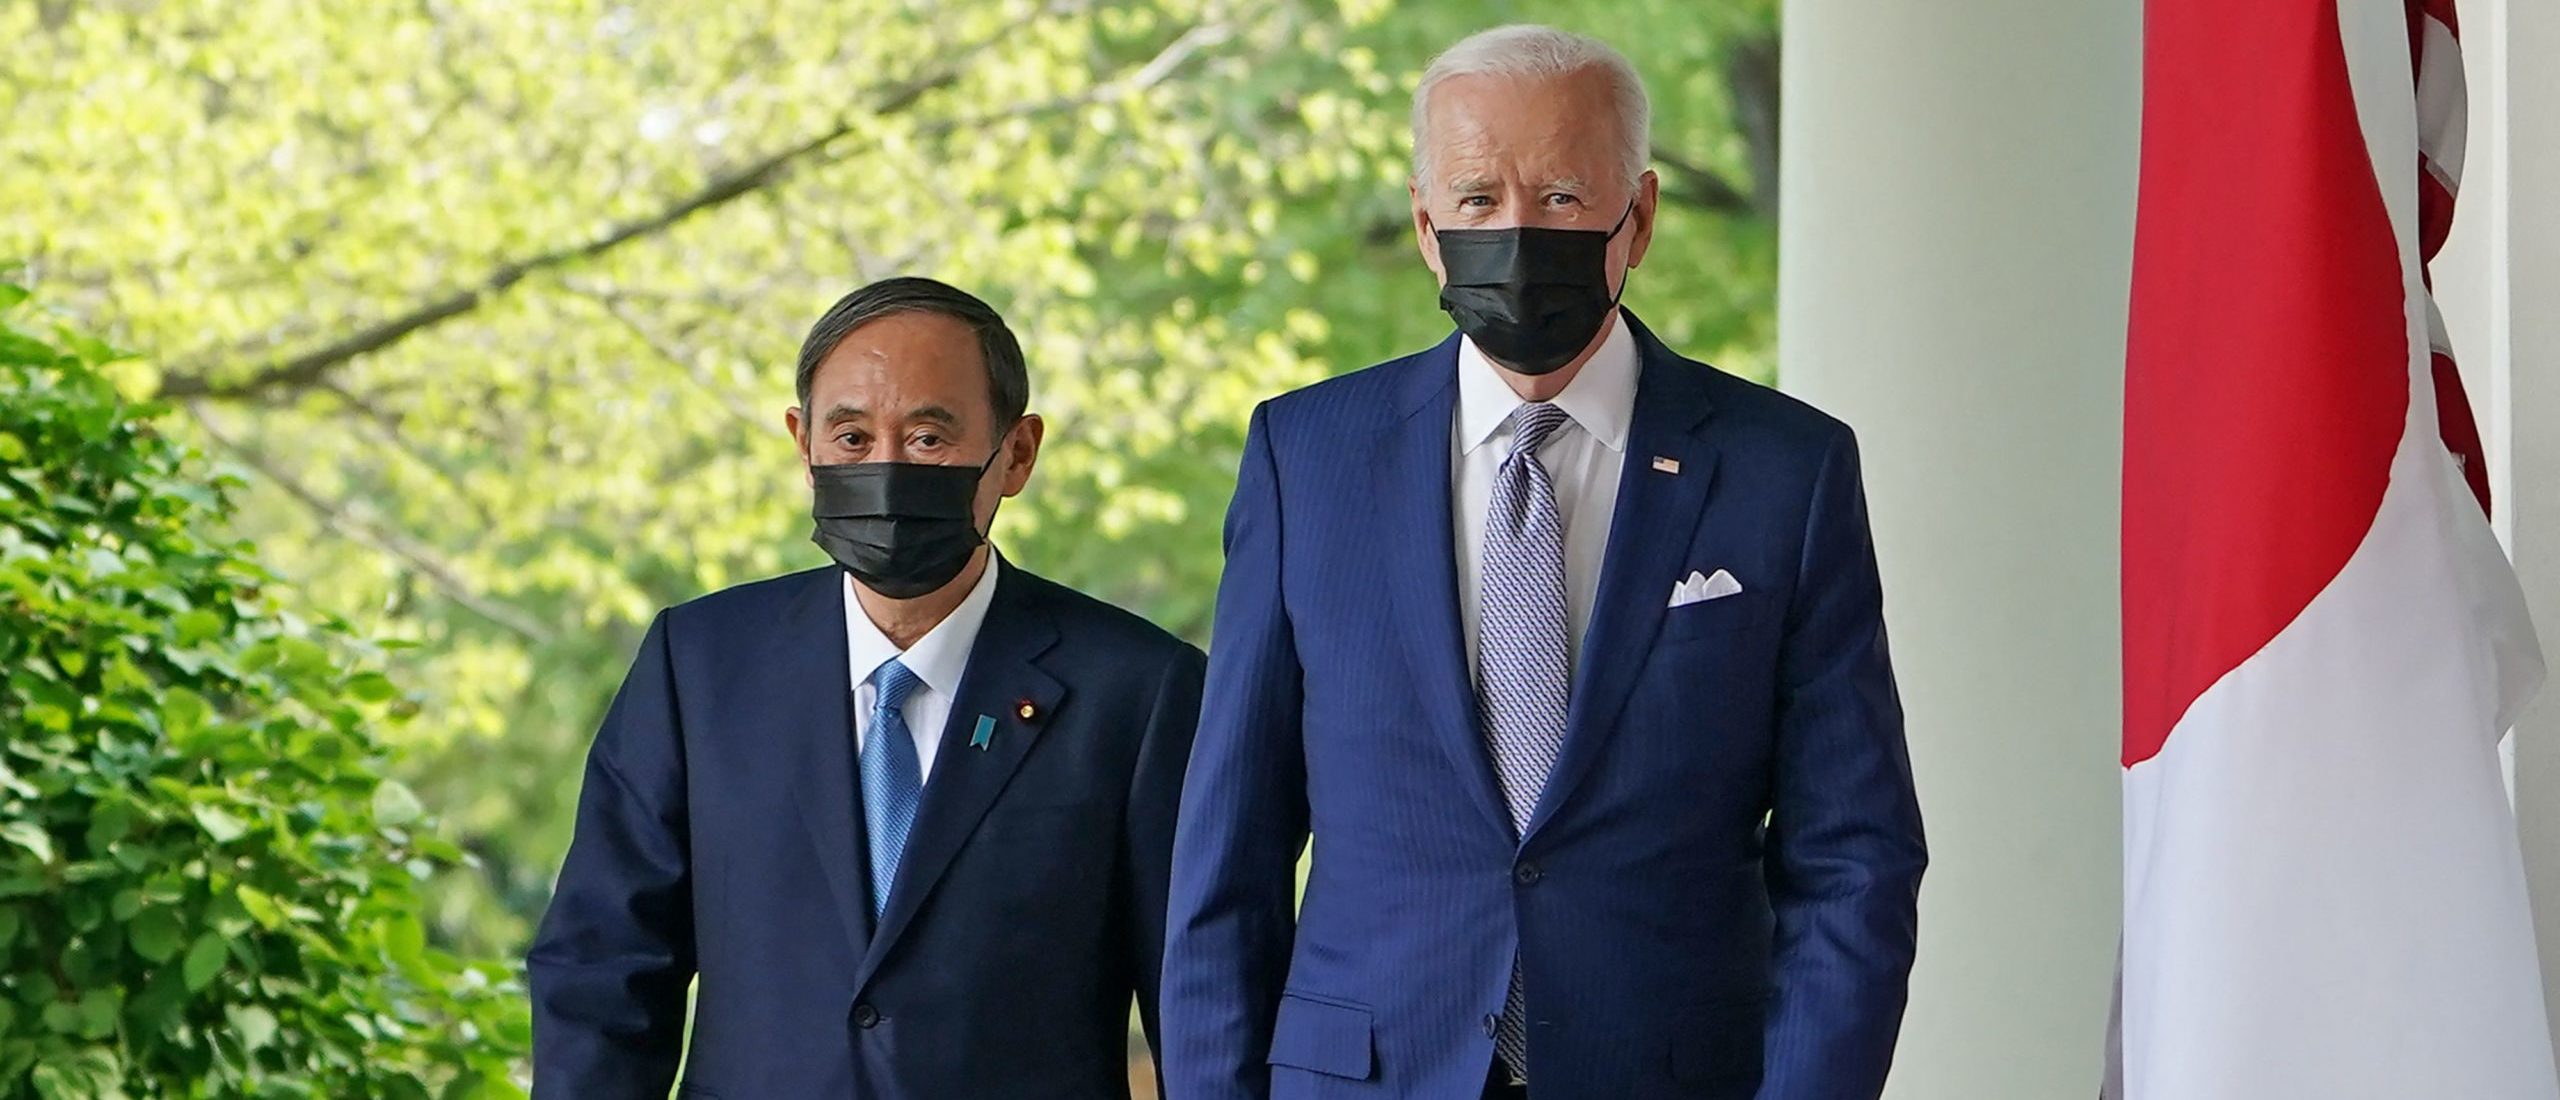 US President Joe Biden and Japan's Prime Minister Yoshihide Suga walk through the Colonnade to take part in a joint press conference in the Rose Garden of the White House in Washington, DC on April 16, 2021. (Photo by MANDEL NGAN/AFP via Getty Images)